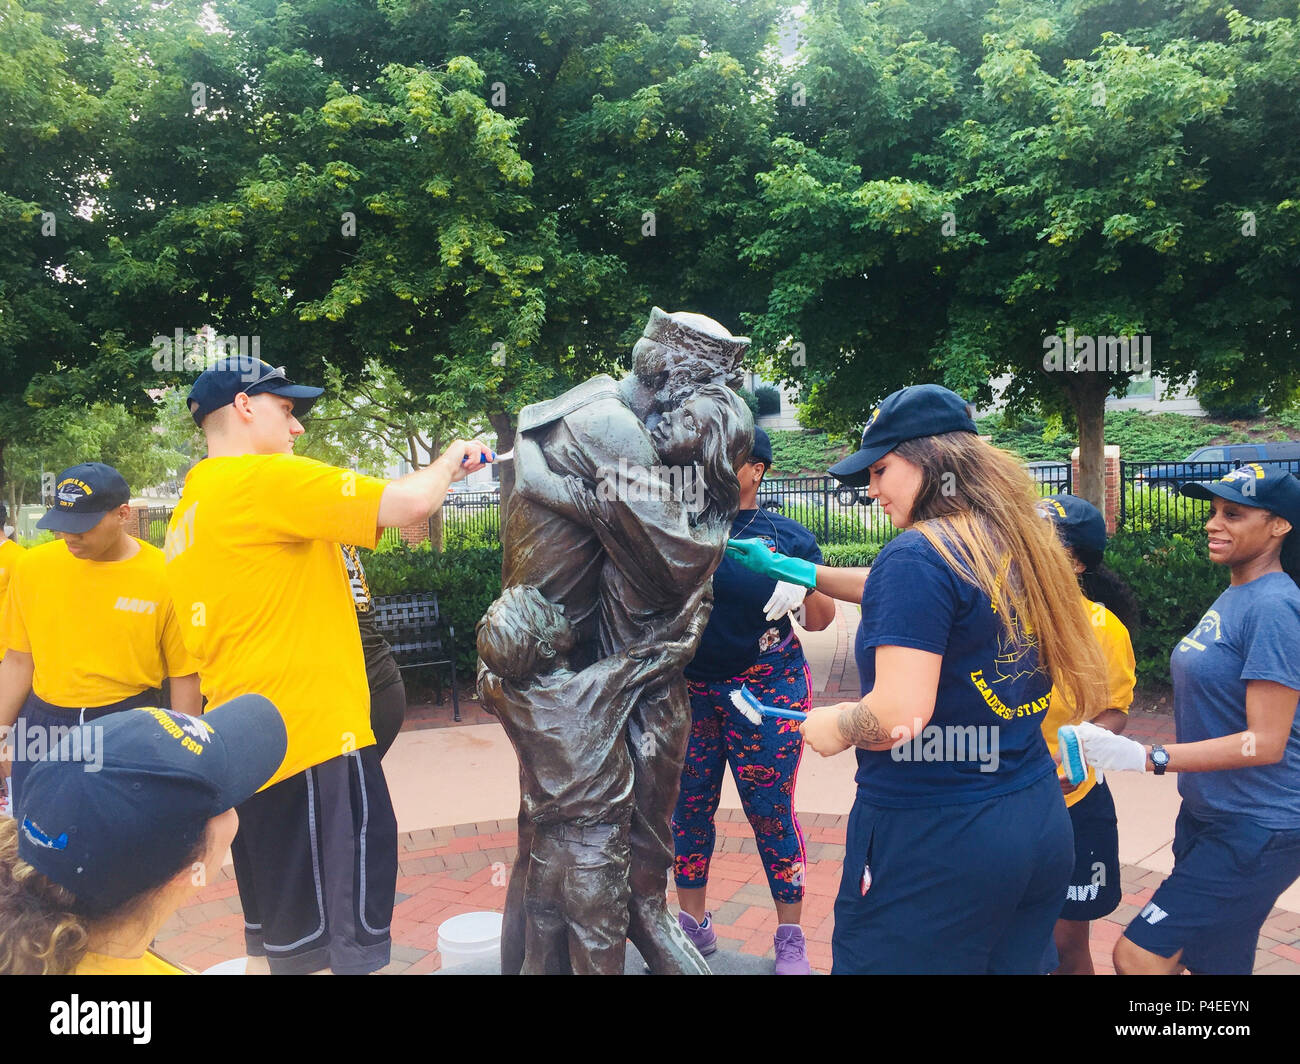 180618-N-VU442-0001 NORFOLK, Virginia (June 18, 2018) Sailors assigned to the aircraft carrier USS George H.W. Bush (CVN 77) clean the “Homecoming” statue at Norfolk’s Town Point Park. As a birthday tribute to the ship’s namesake, and representing his famous “Thousand Points of Light” speech, approximately 1,000 GHWB crew members took part in one of the largest single-day community relation (COMREL) events at 44 different locations throughout the Hampton Roads area. George H.W. Bush turned 94 on June 12. (U.S. Navy photo by Senior Chief Mass Communication Specialist Mike Jones) Stock Photo